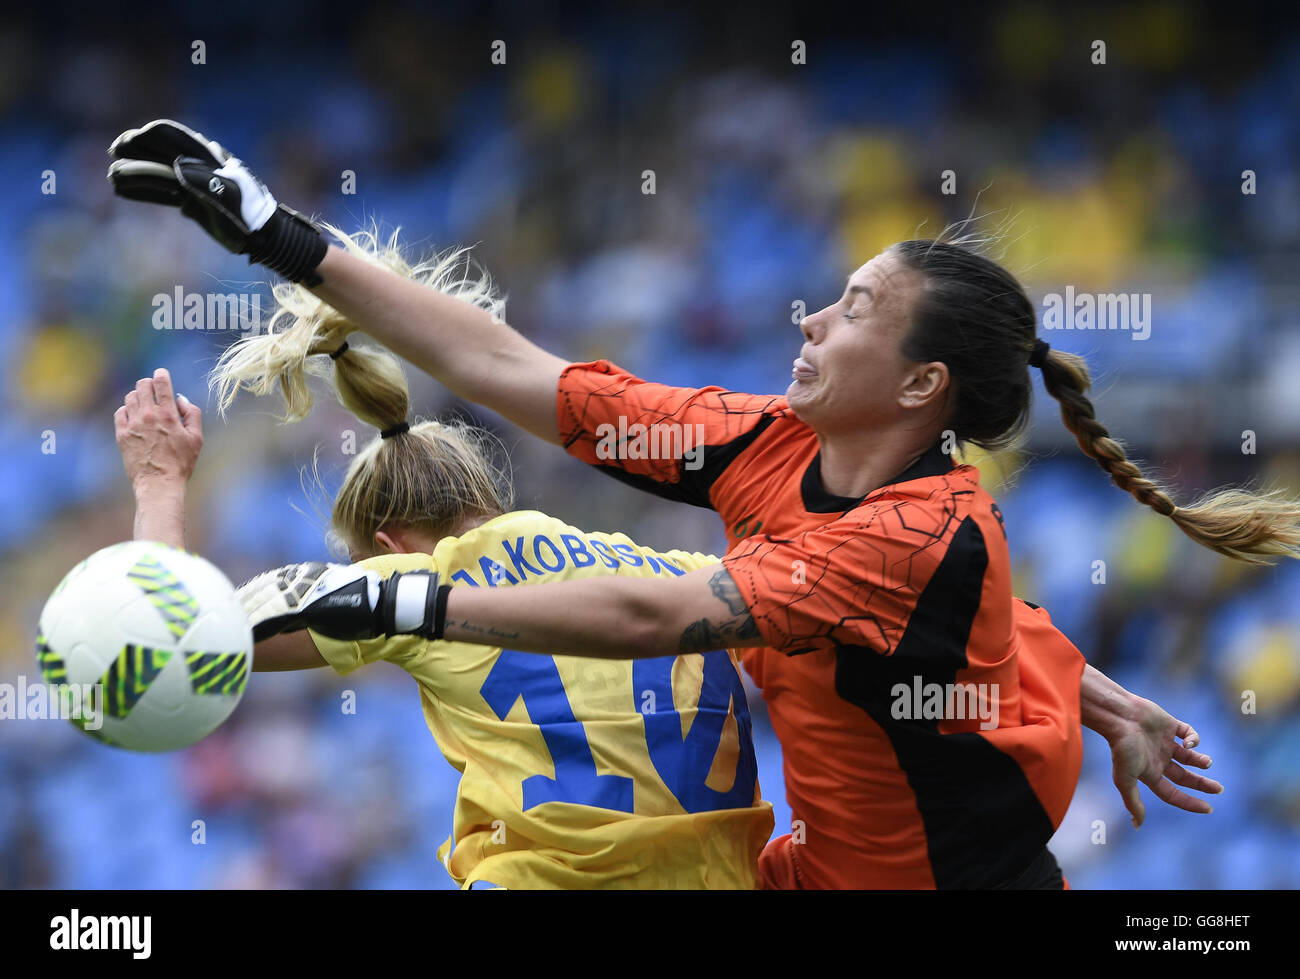 Rio De Janeiro, Brazil. 3rd Aug, 2016. Jakobsson Sofia of Sweden (L) vies with Barker Roxanne of South Africa during the opening match of the women's Olympic football competitions between South Africa and Sweden at the Olympic Stadium in Rio de Janeiro, Brazil, Aug. 3, 2016. Sweden won 1-0. © Qi Heng/Xinhua/Alamy Live News Stock Photo